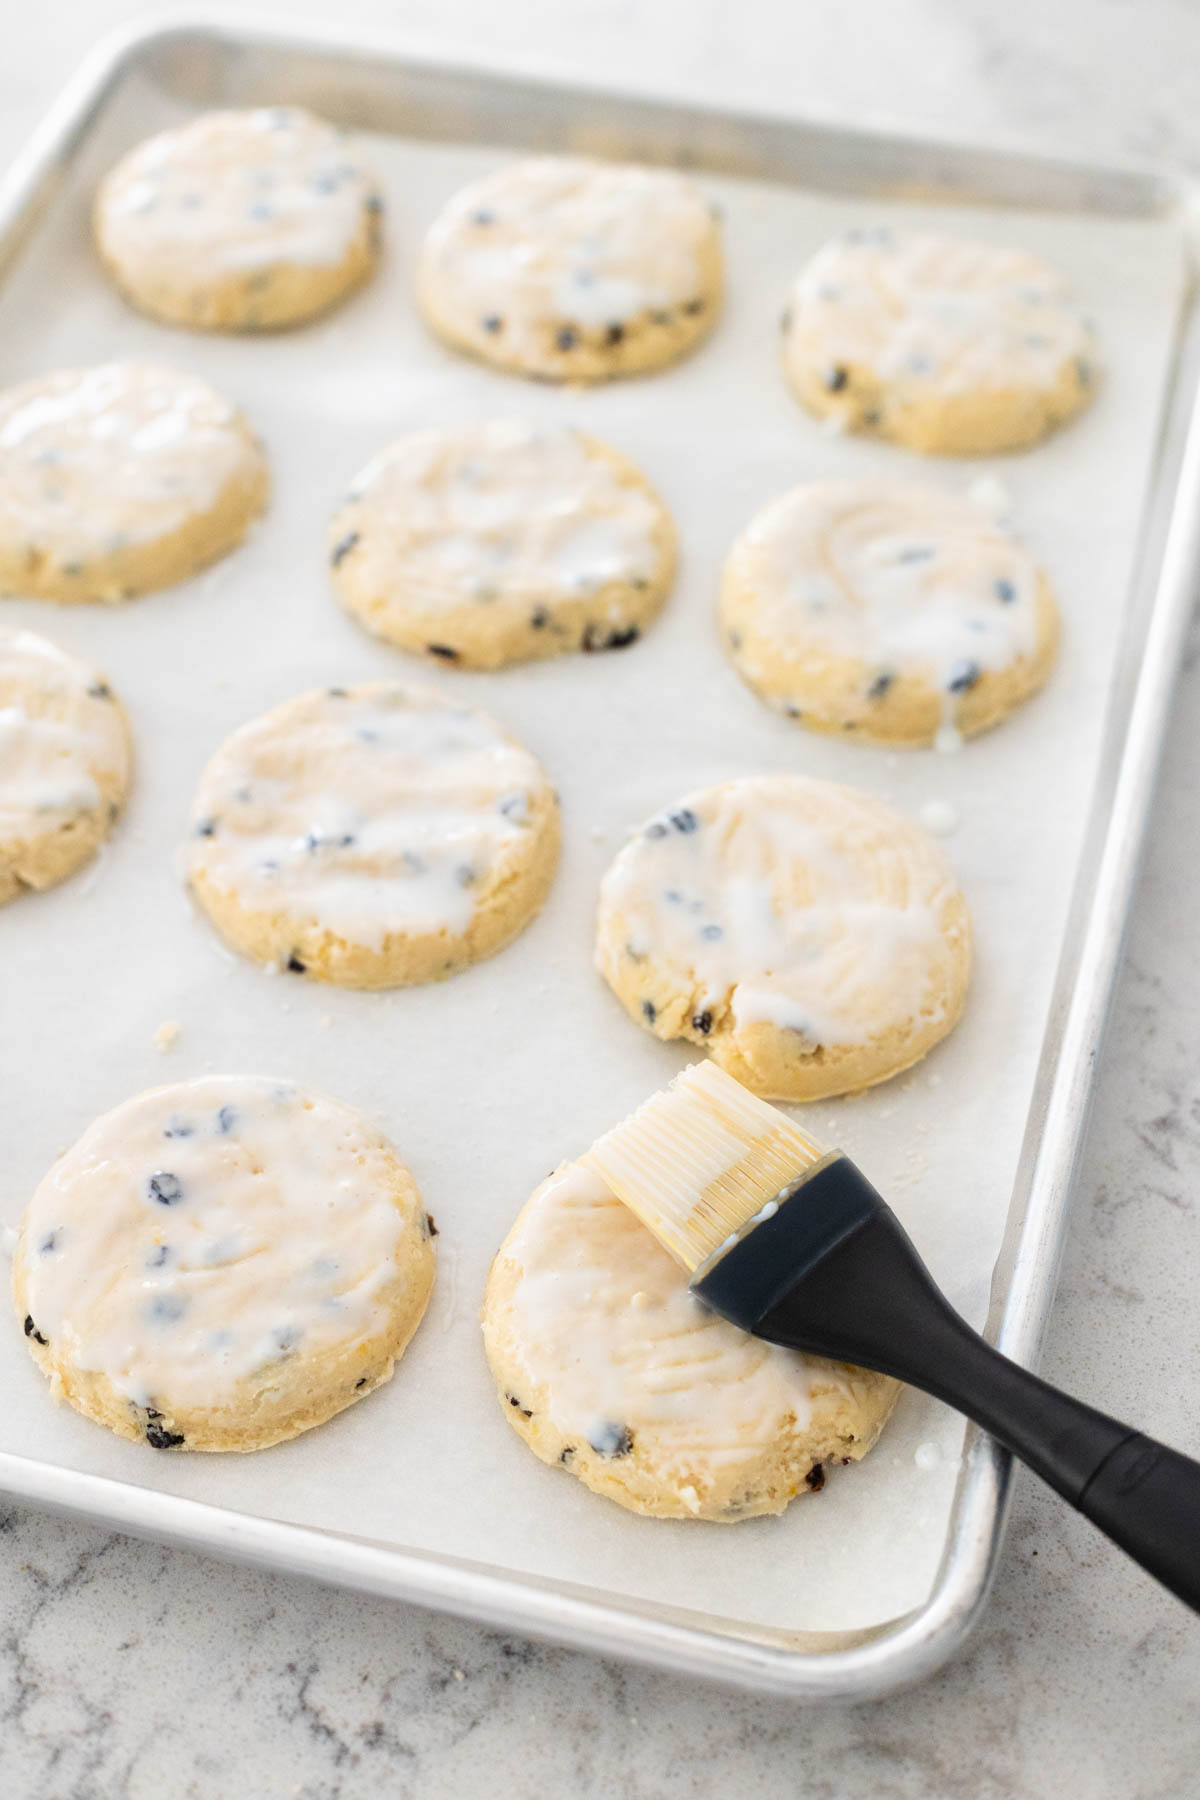 The pastry brush is brushing buttermilk over the top of the biscuits before baking.